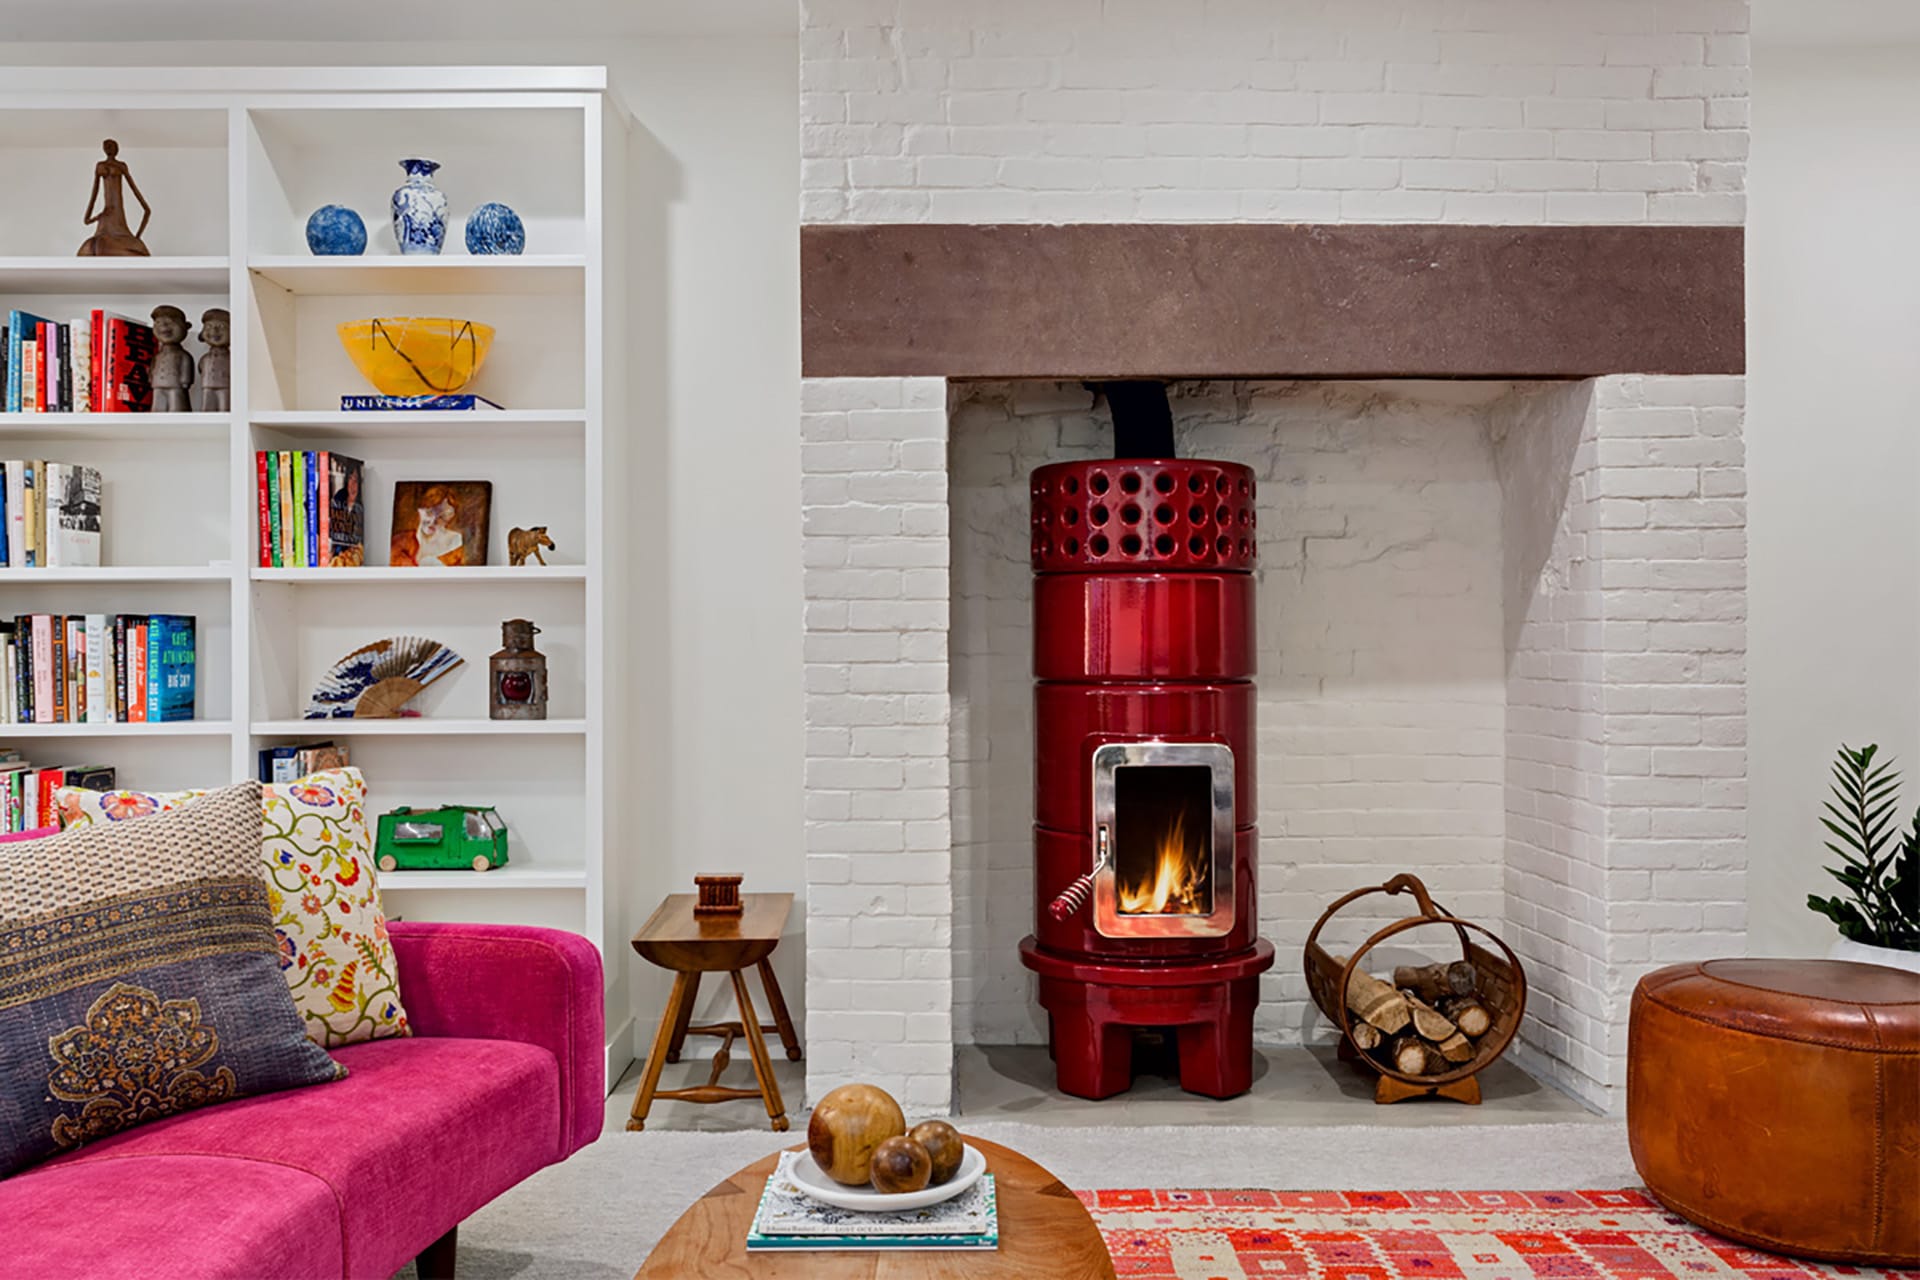 Bright red Scandinavian fireplace in the garden-level living room of a Brooklyn Heights townhouse